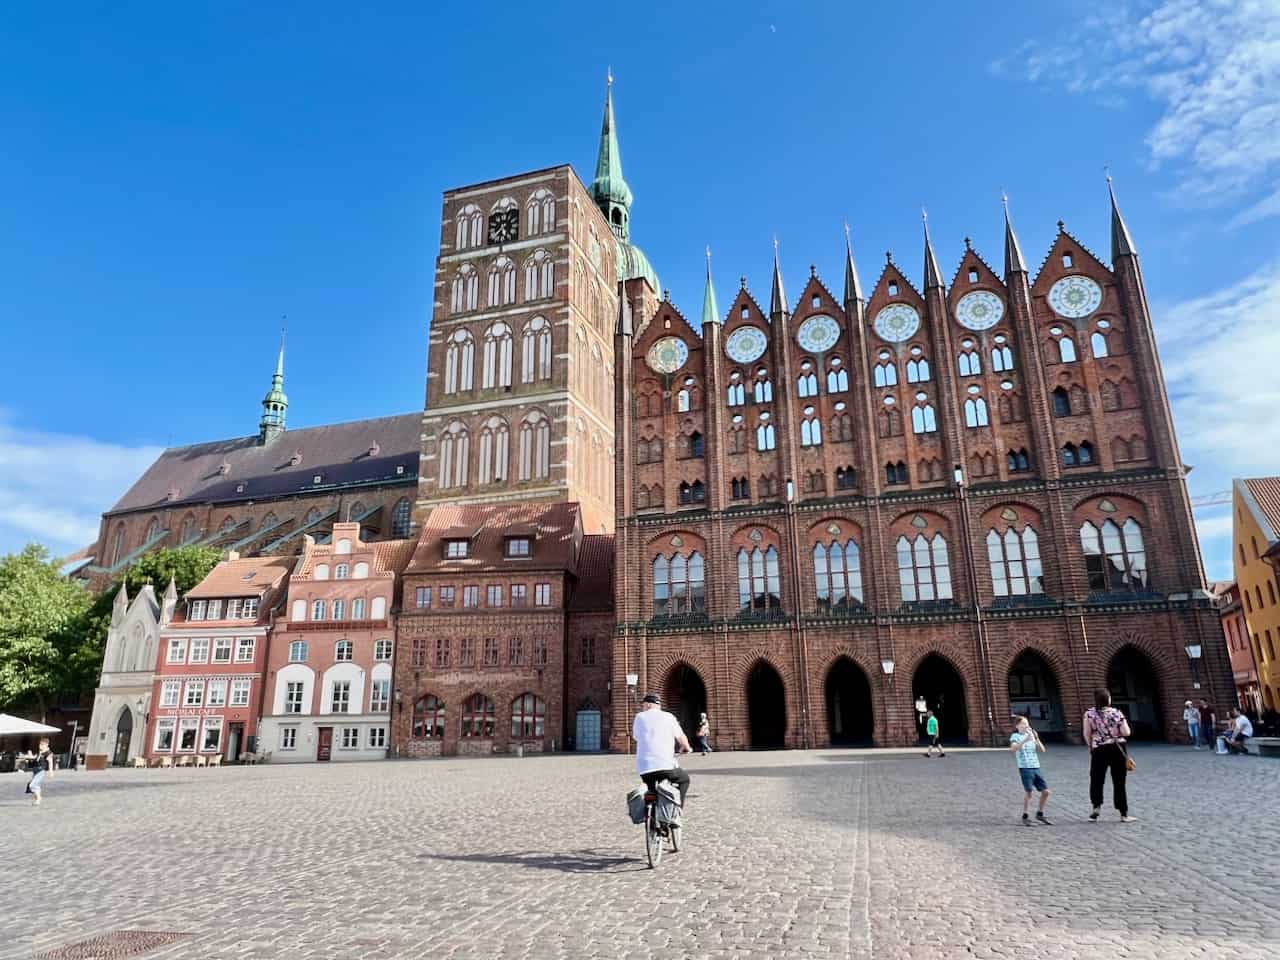 Things to see in Stralsund, Germany